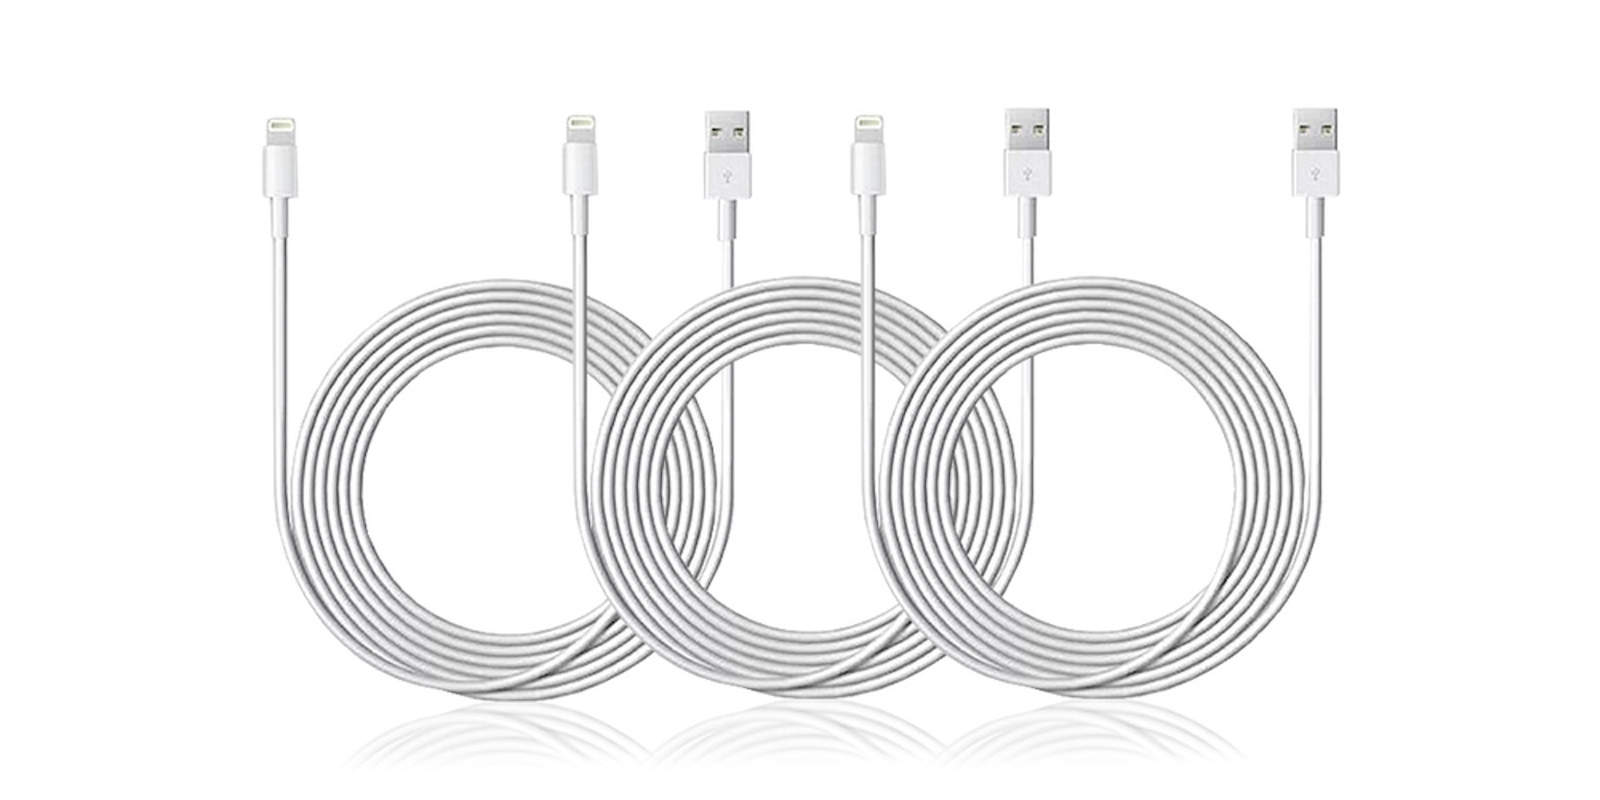 Get triple backup for your Lightning cables at more than triple the usual length.